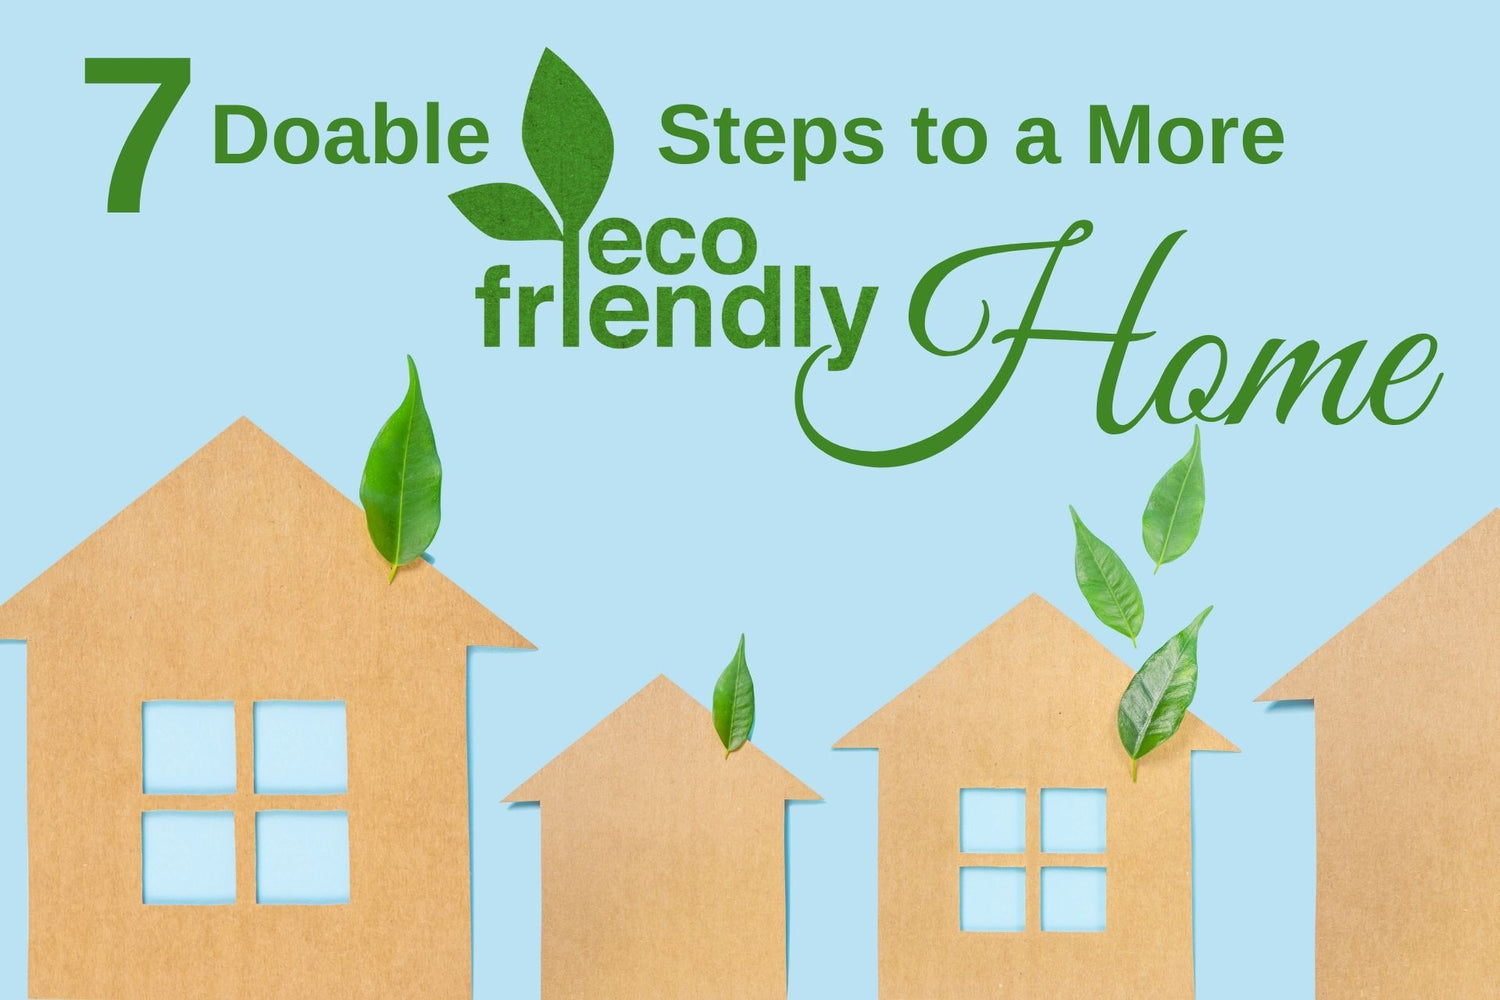 7 Doable Steps to a More Eco-Friendly Home